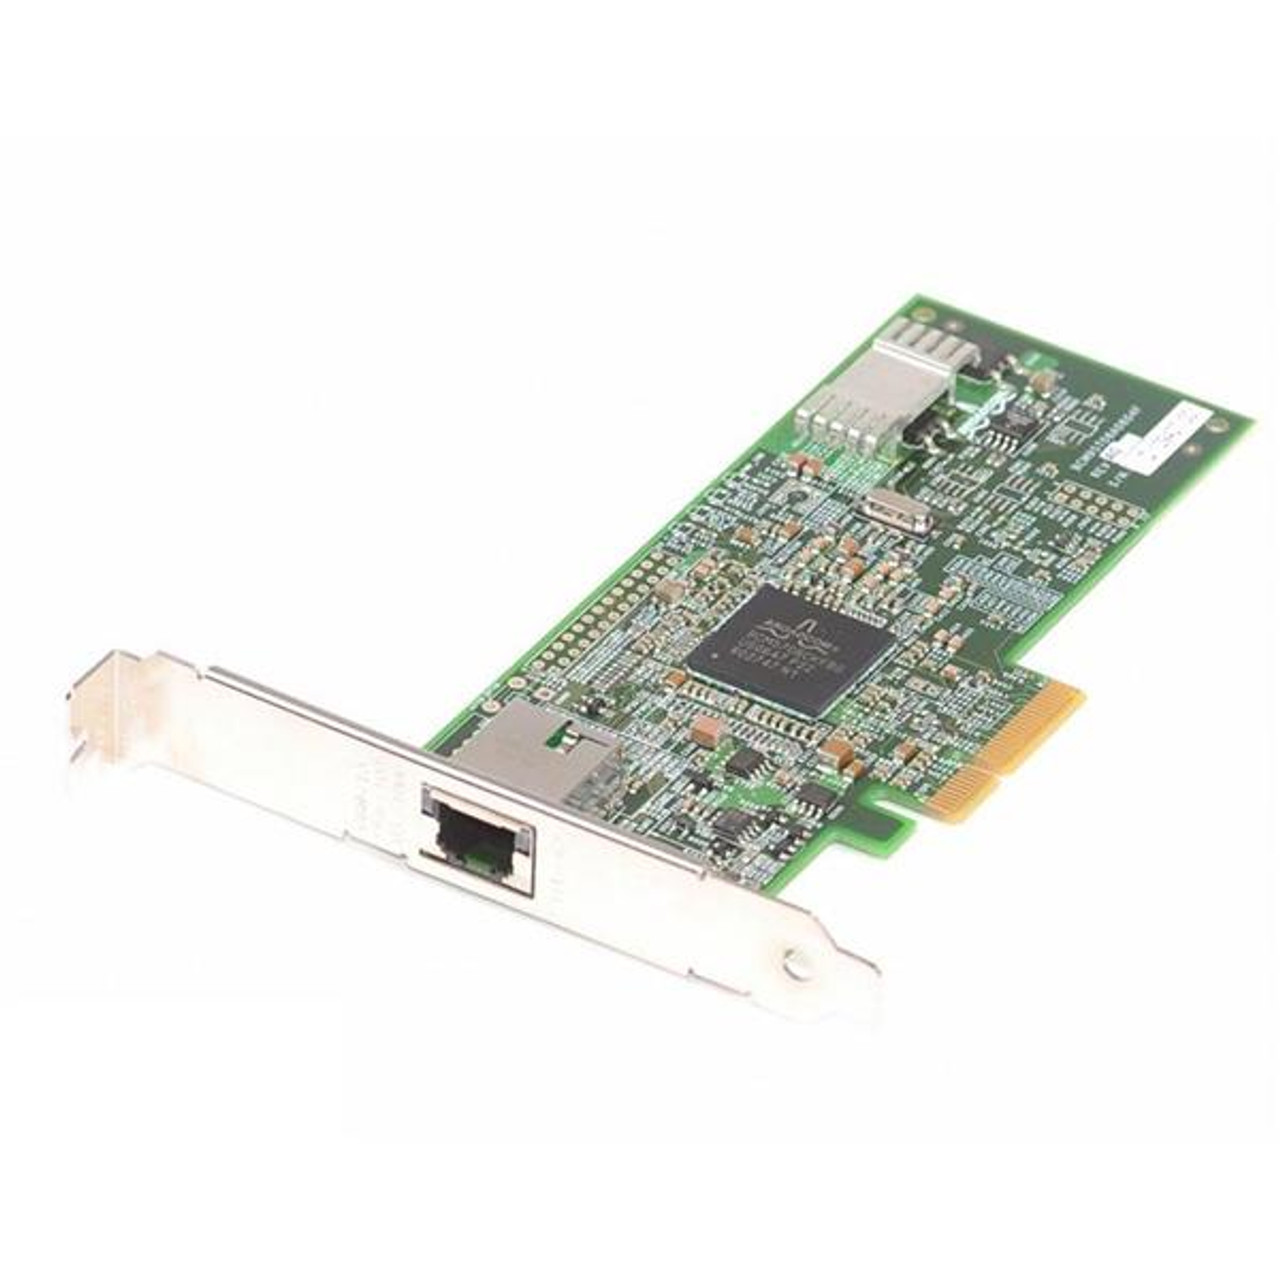 39Y6066AOK ADDONICS NetXtreme II 1000 Express Ethernet Adapter for System X PCIE GEN2 Servers